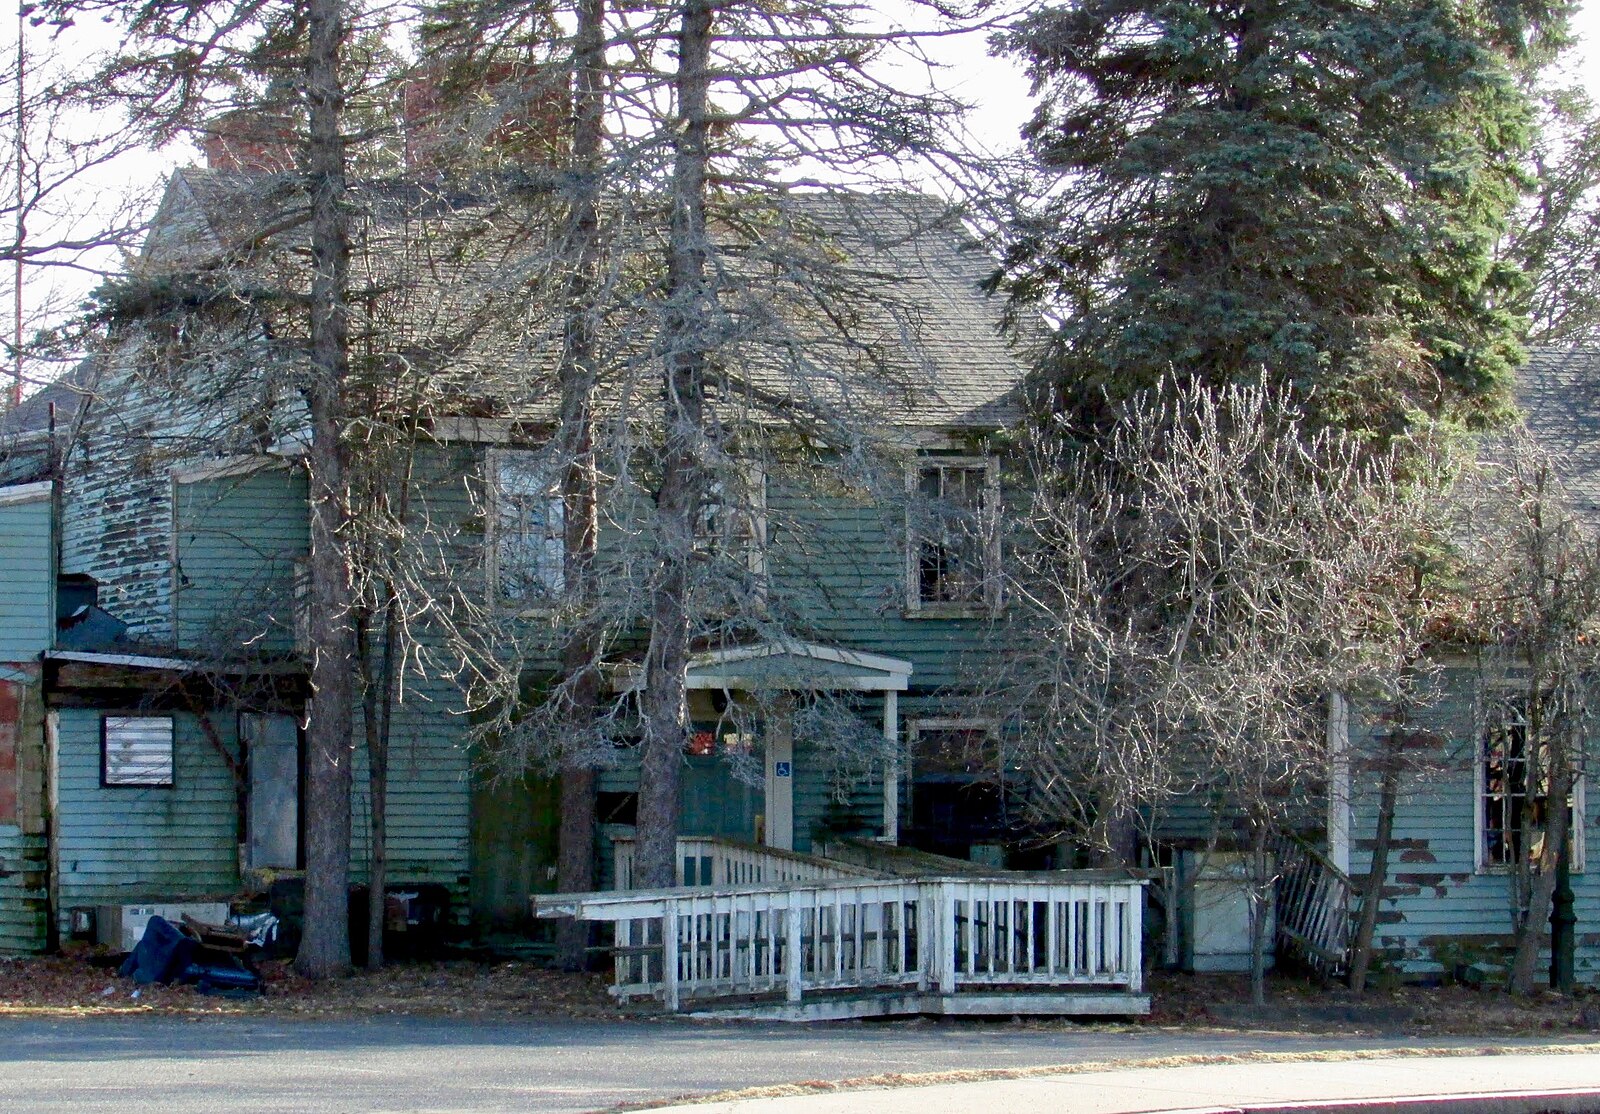 A recent survey by the Swampscott Historical Commission found that much of the original house was still intact, although in deteriorating condition.